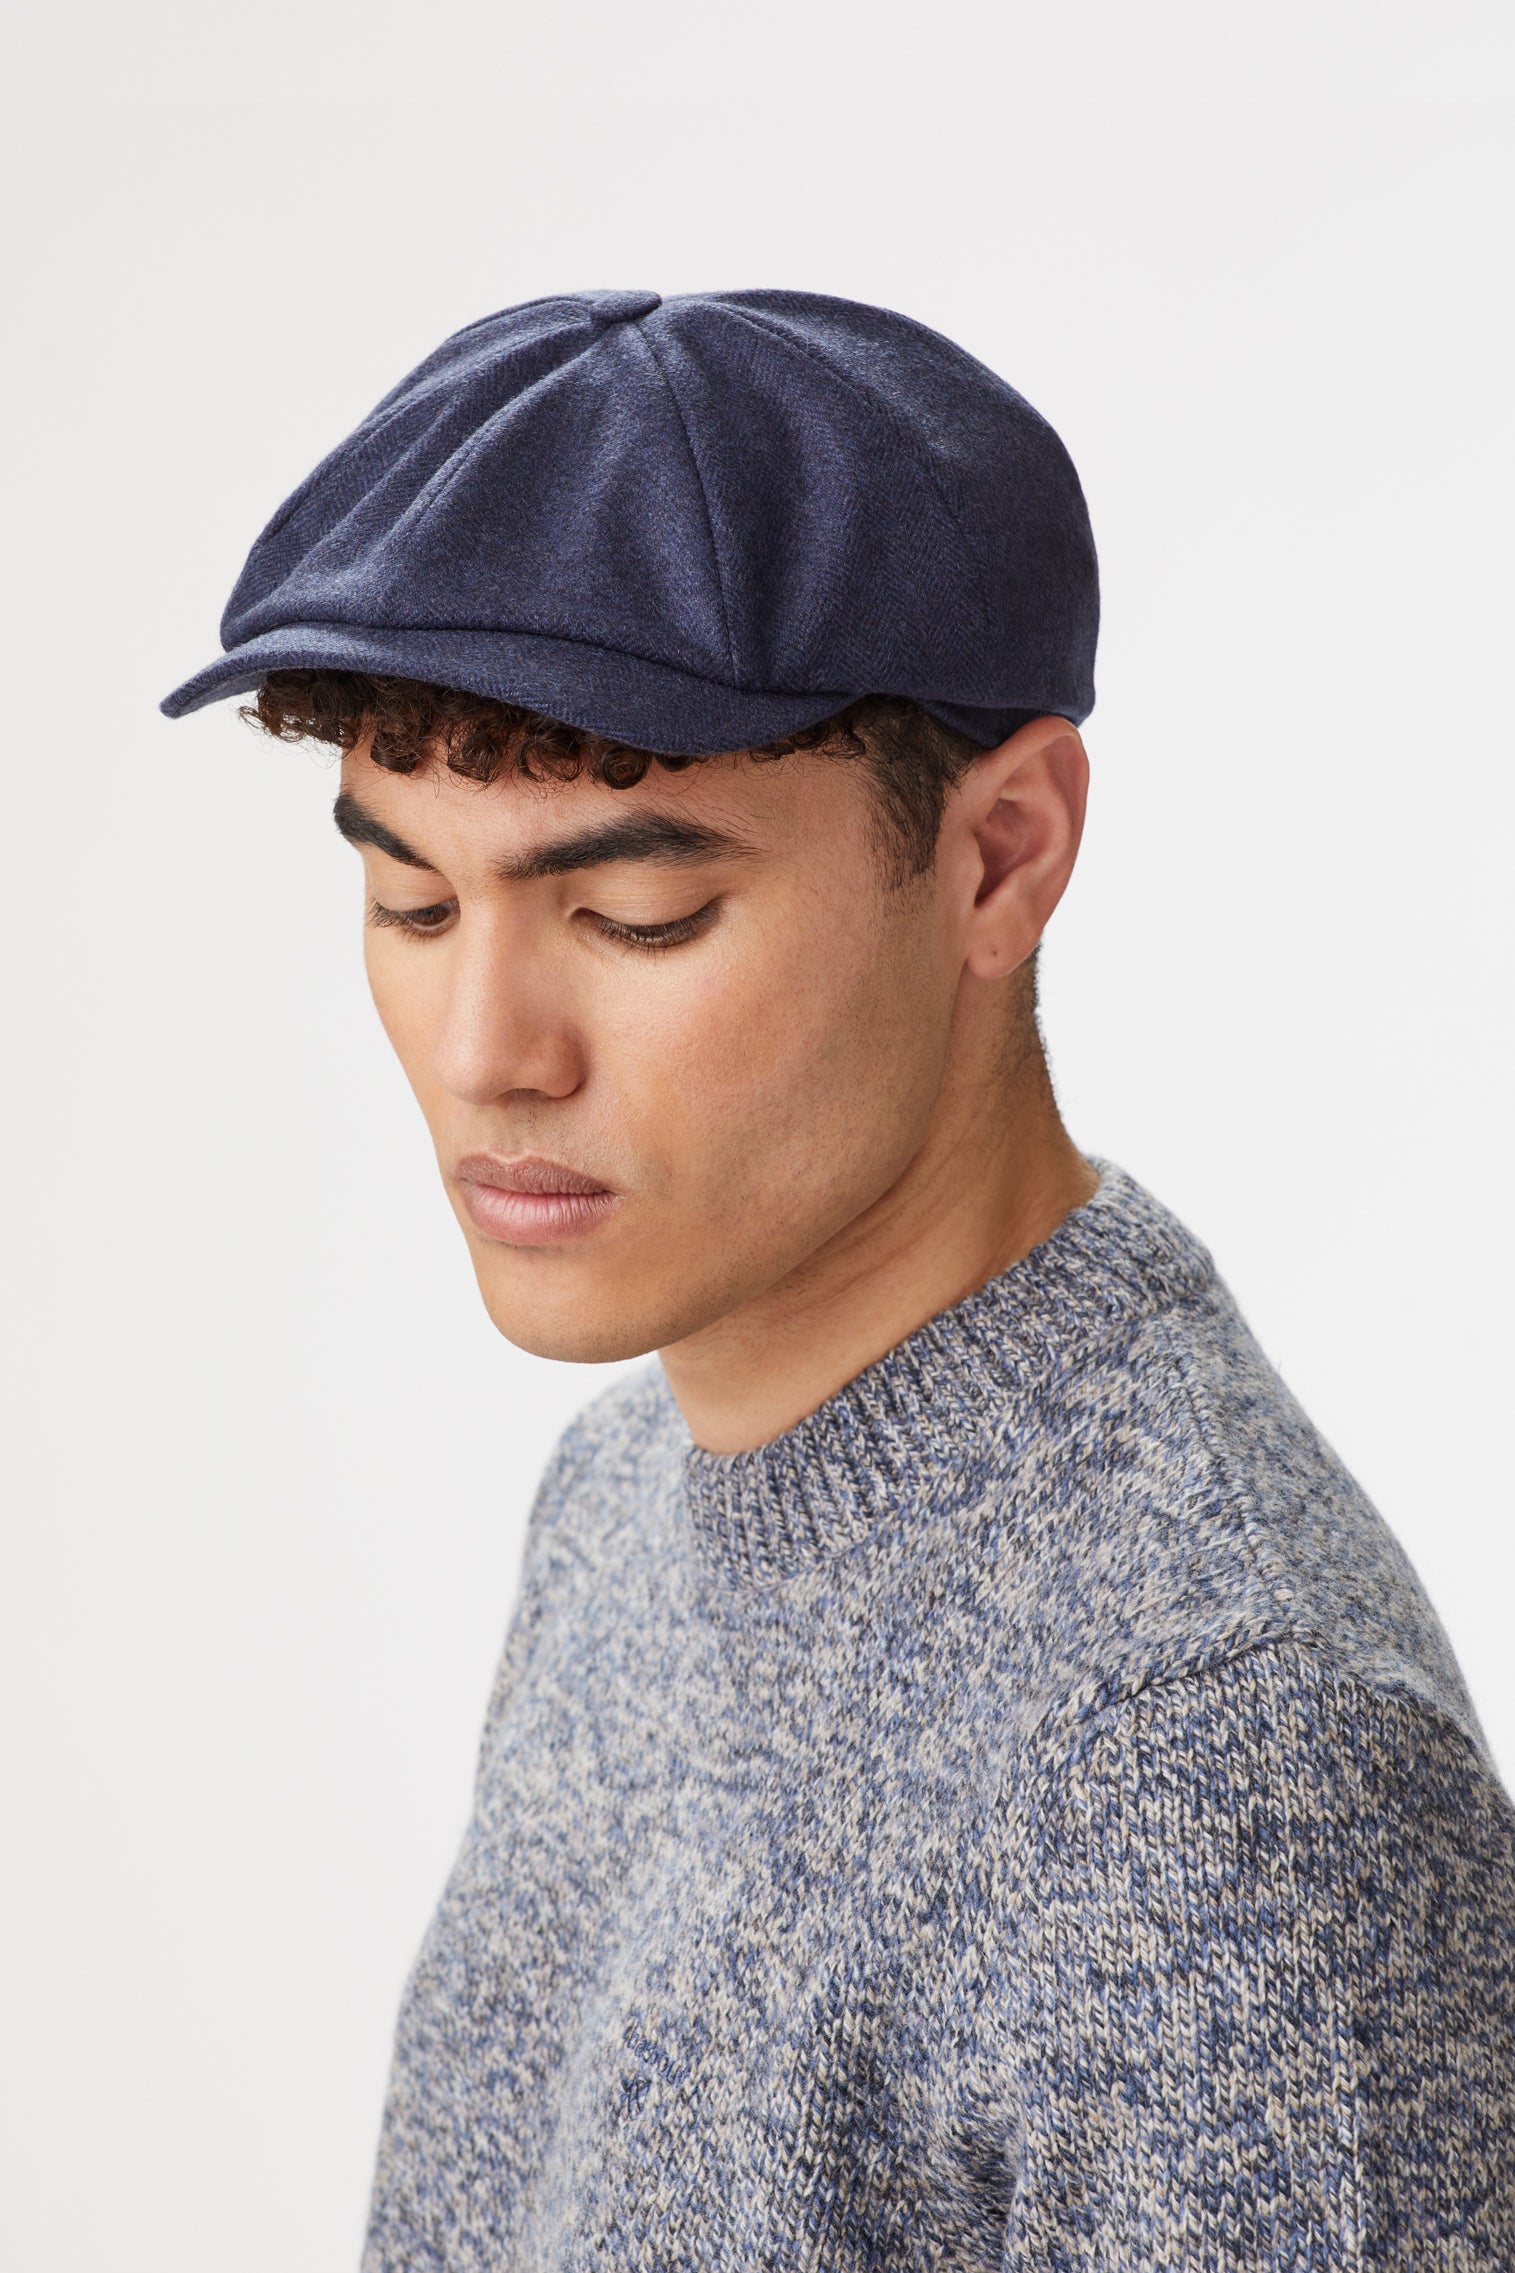 Cashmere Newsboy Cap - Hats for Heart-shaped Face Shapes - Lock & Co. Hatters London UK